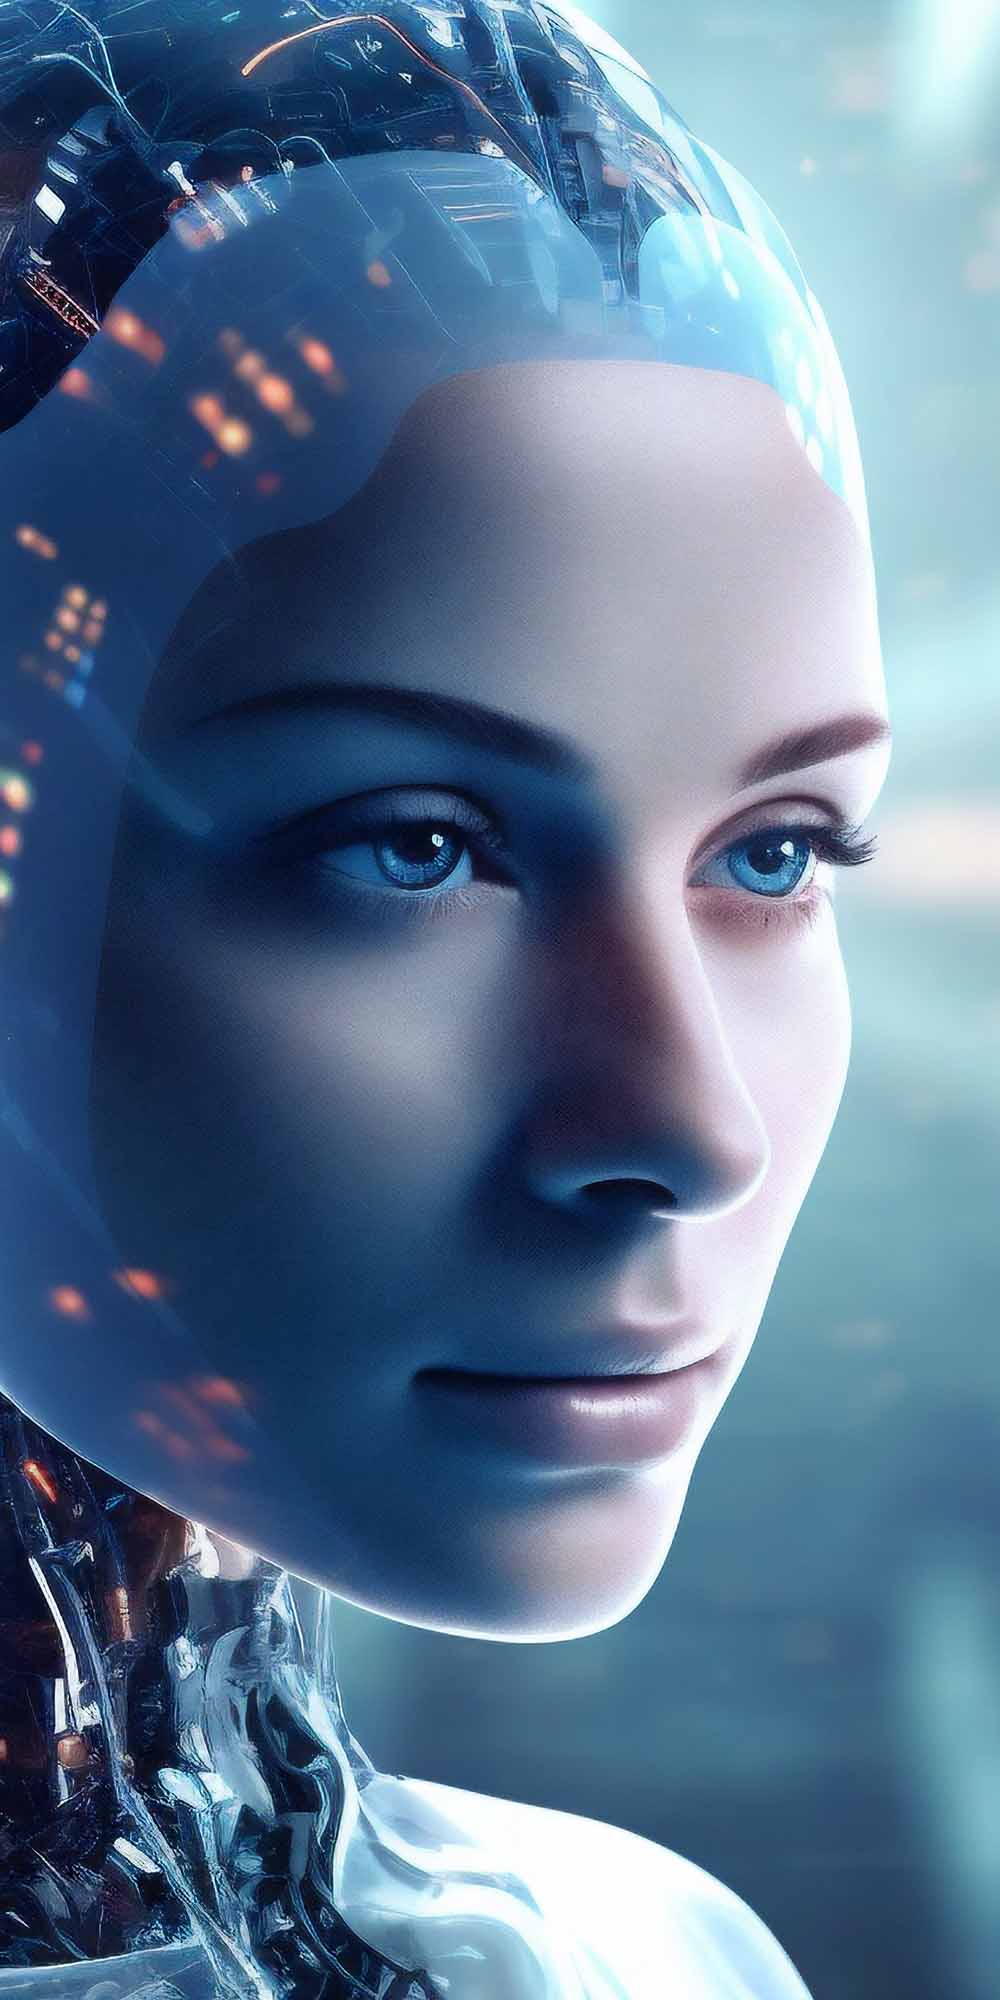 Image of a female android - AI and gender bias